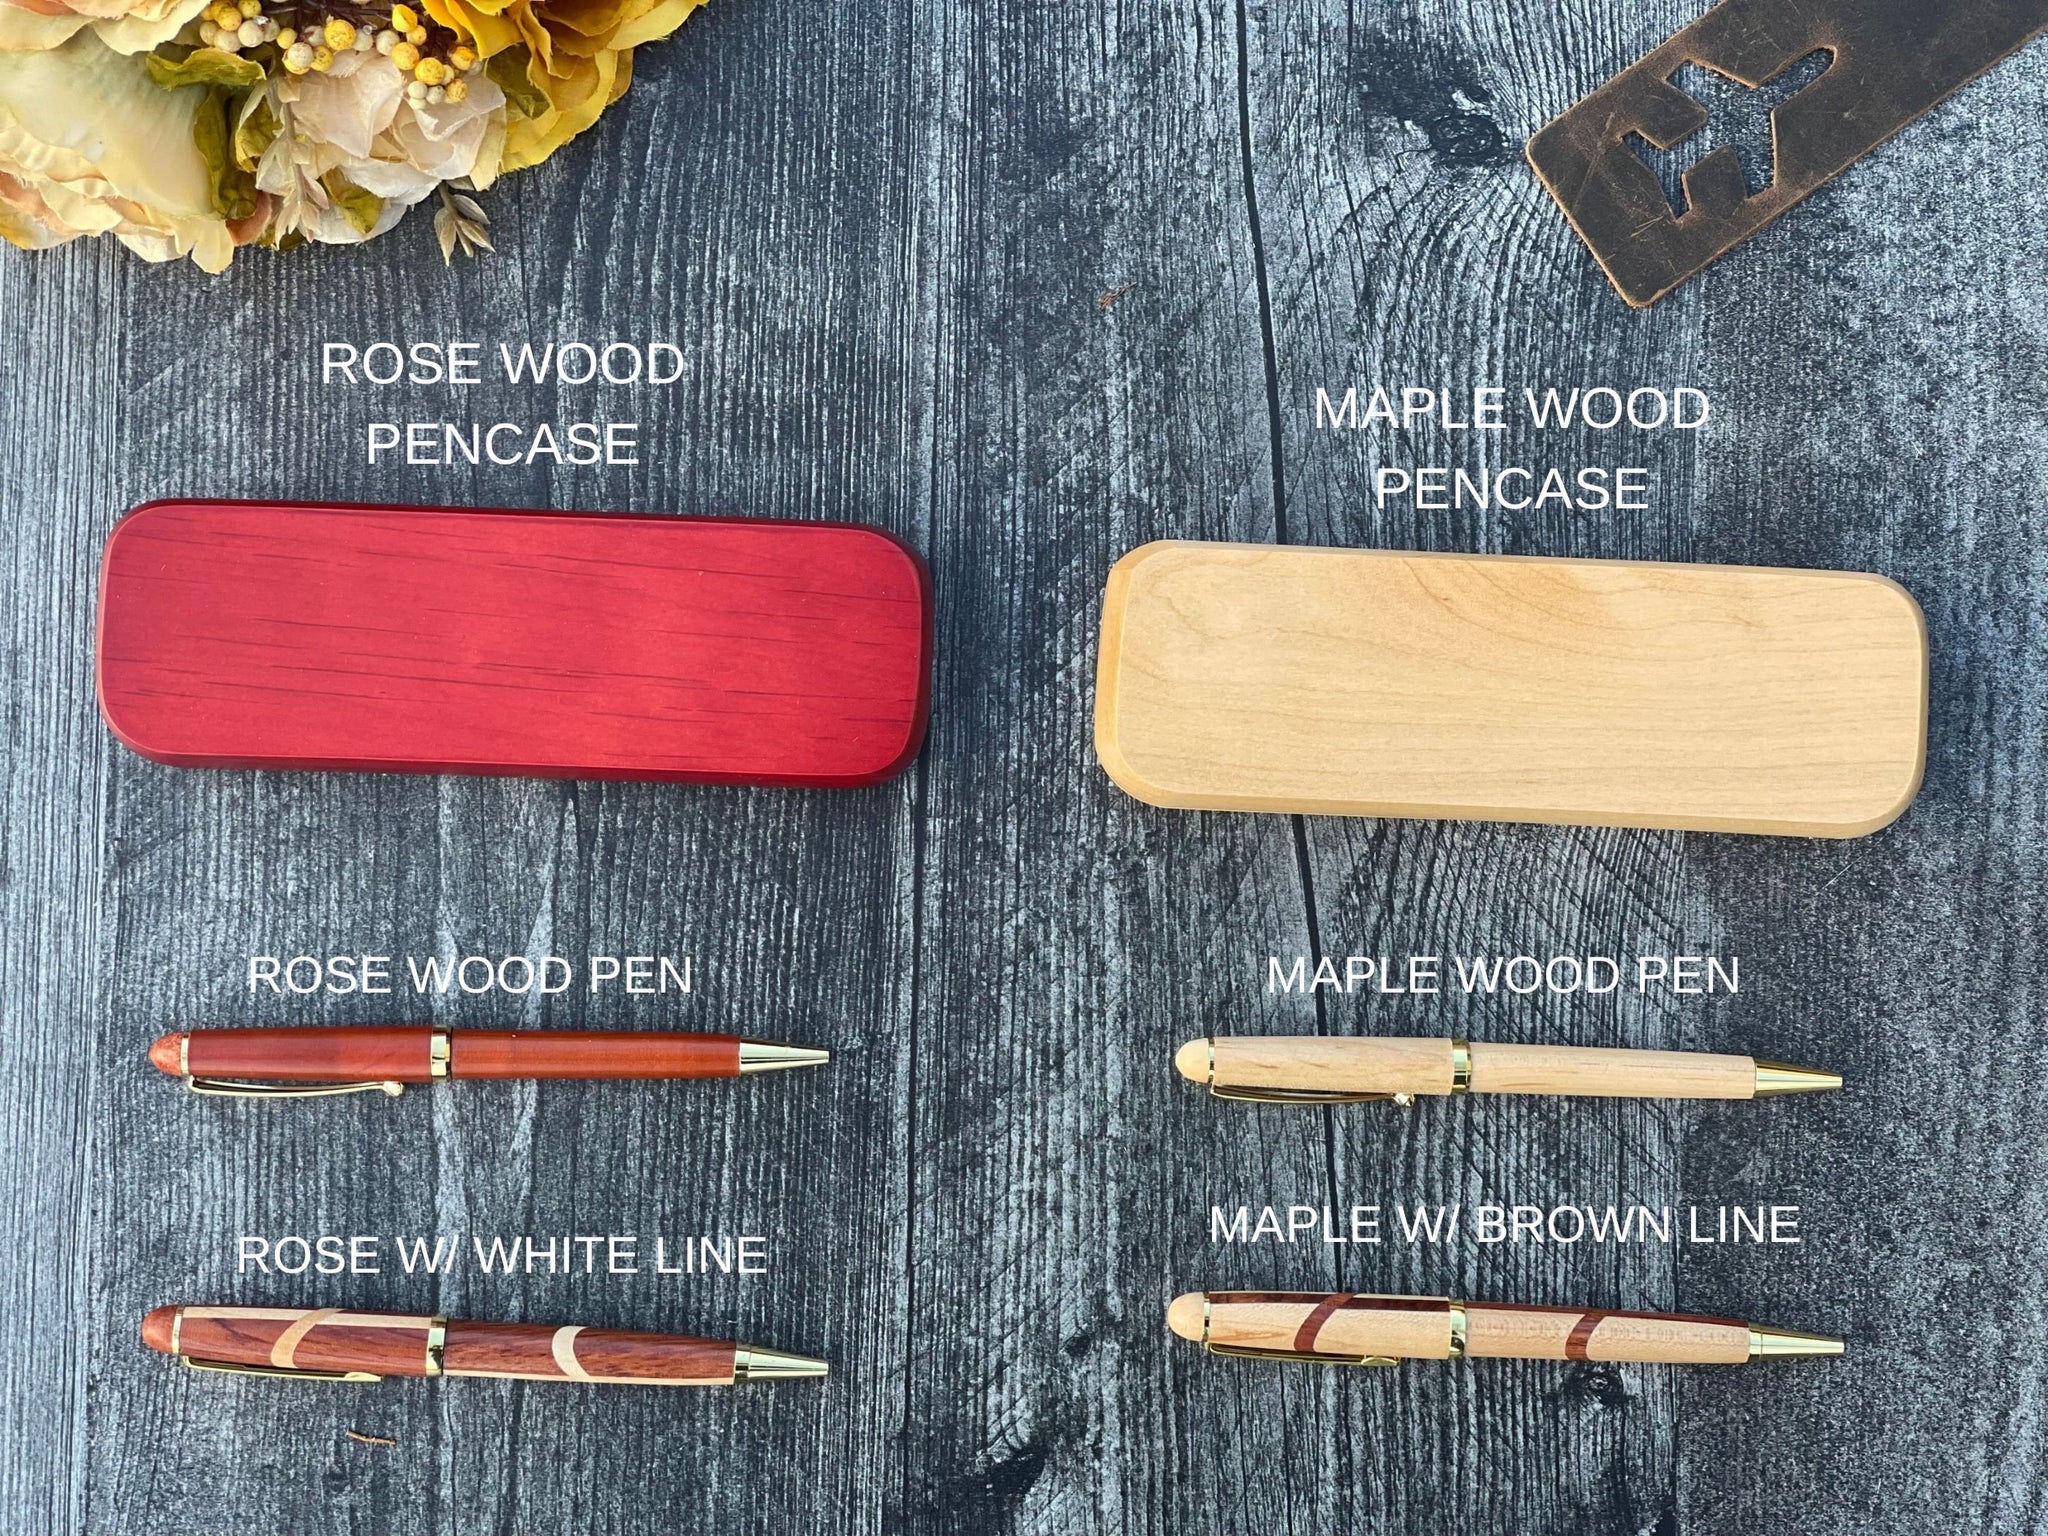 5th Year Anniversary Gift, Personalized Wooden Pen Case and Pen Set, Company gift, office gift, personalized pen case, personalized pen set